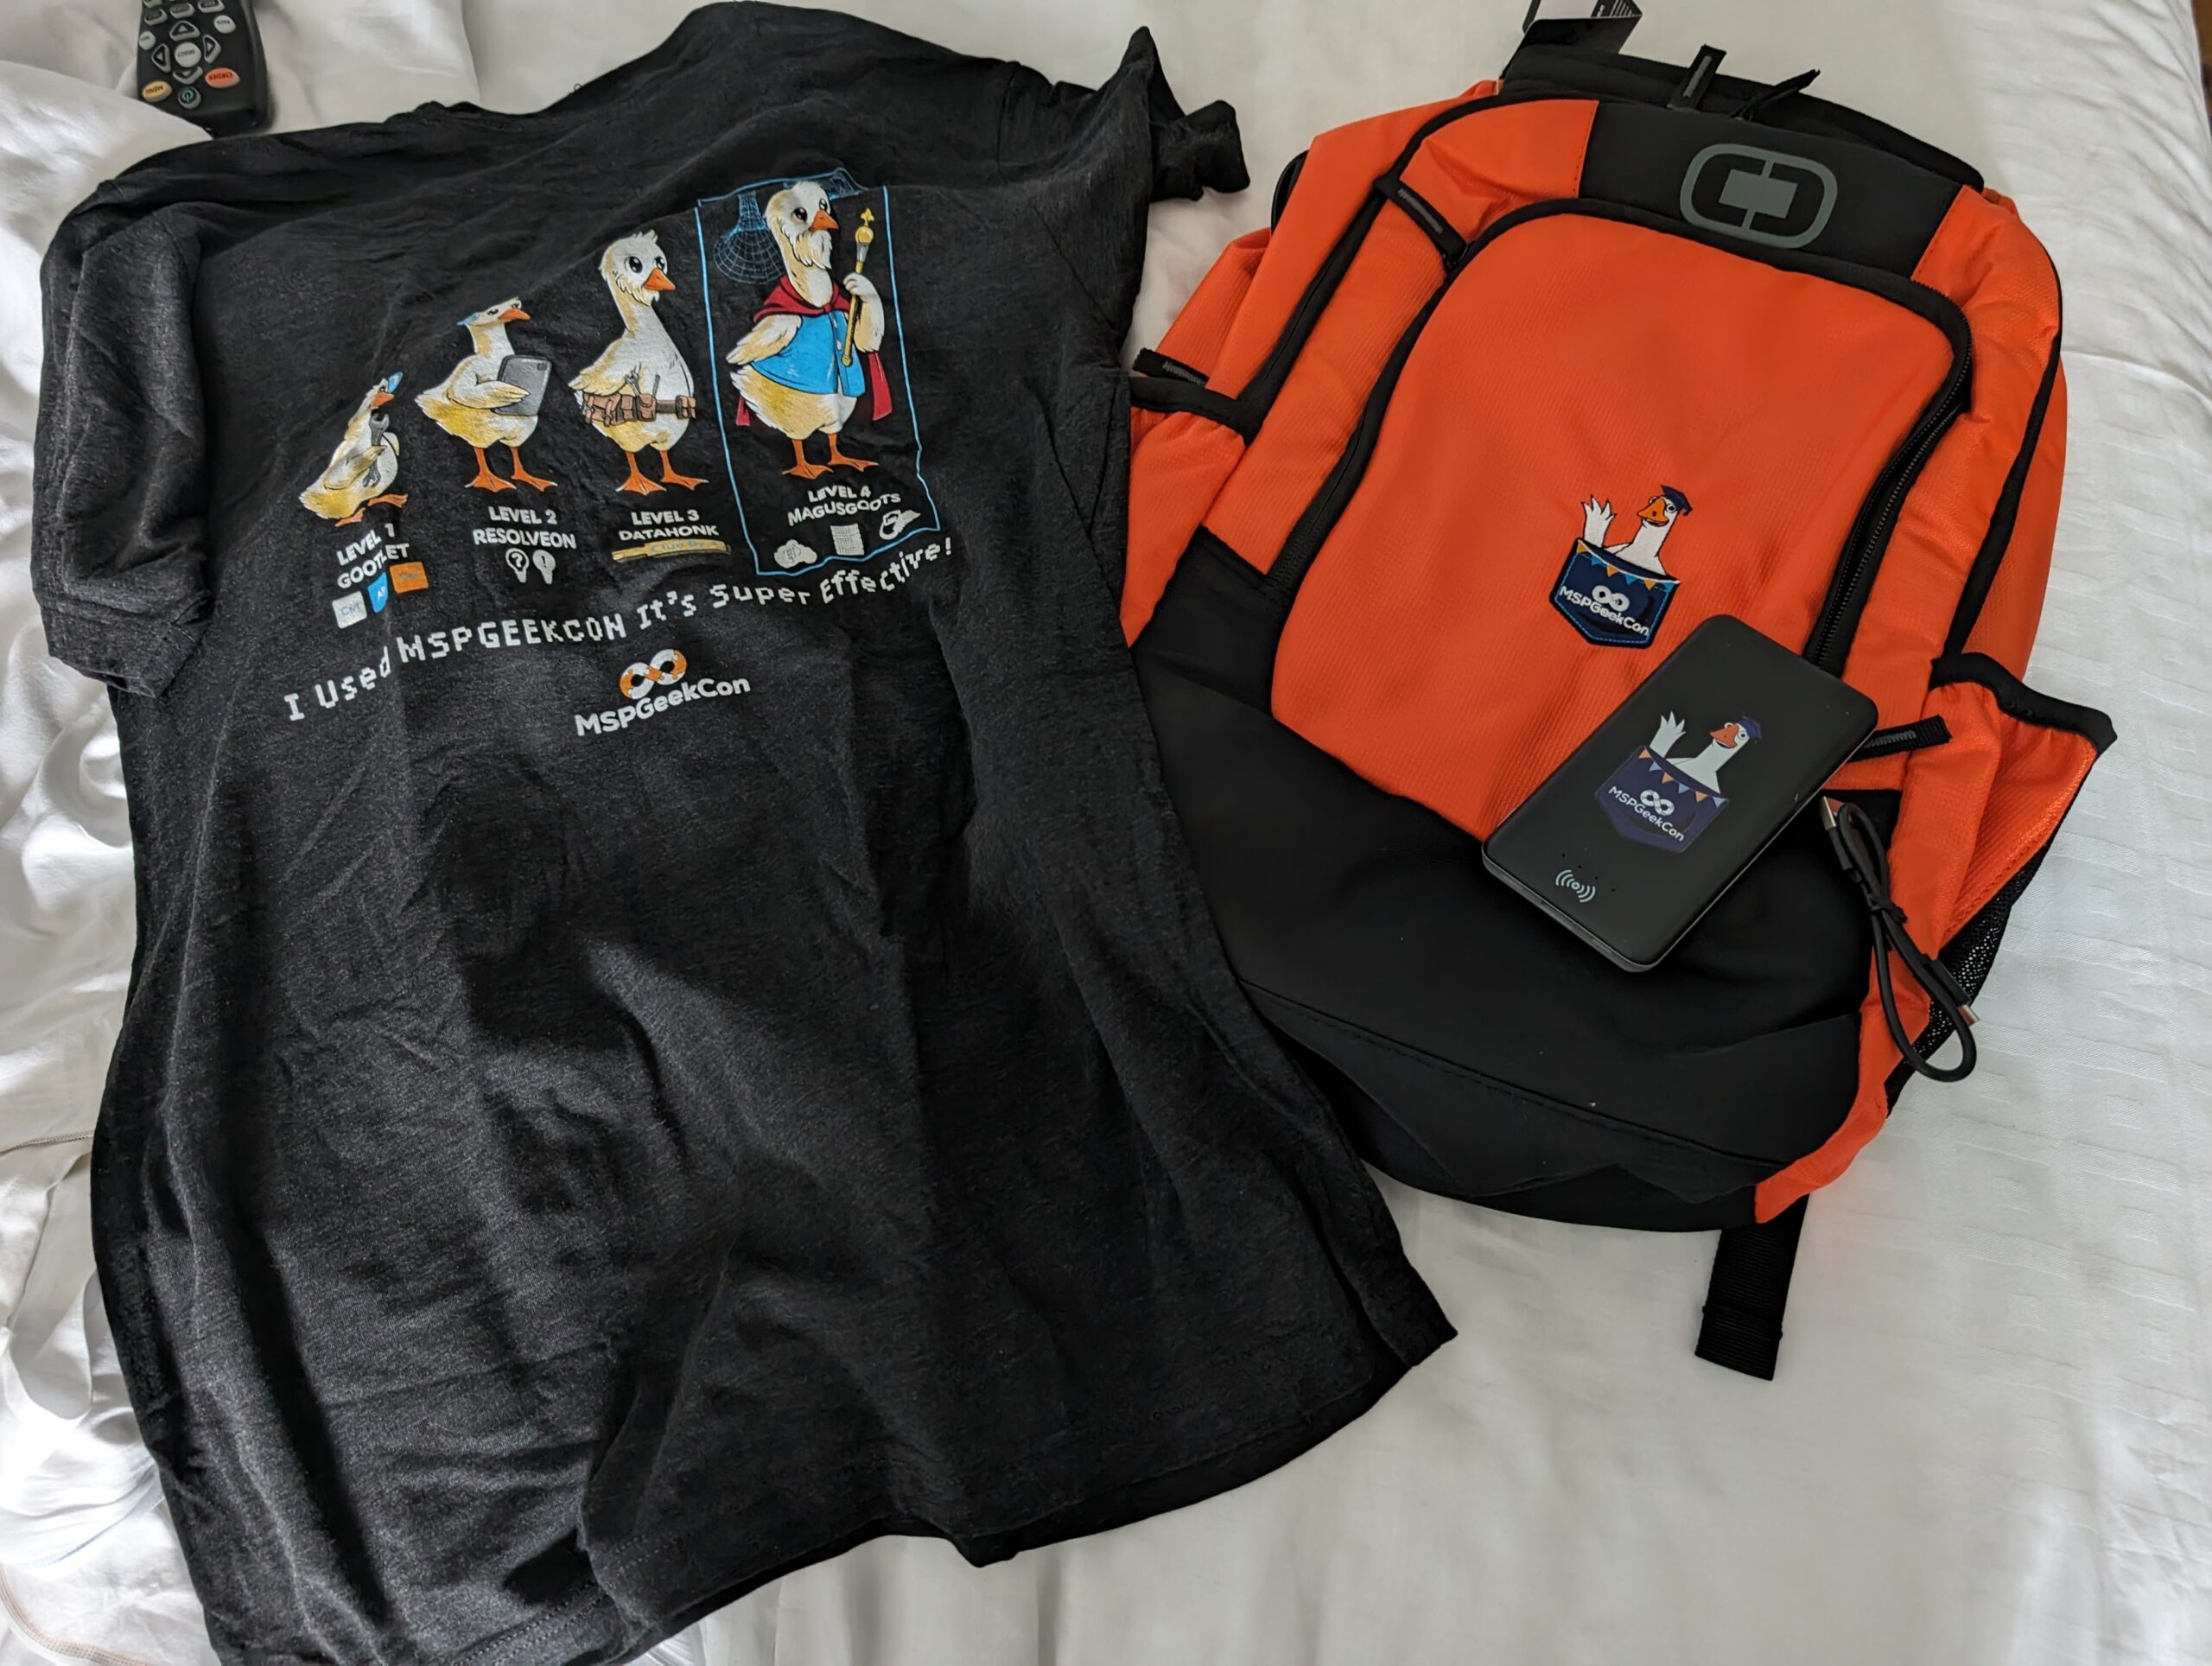 orange backpack, black tshirt, and a black power battery bank on a bed. Each item has a cartoon goose on it. The tshirt has four geese in varying stages of "technical evolution"